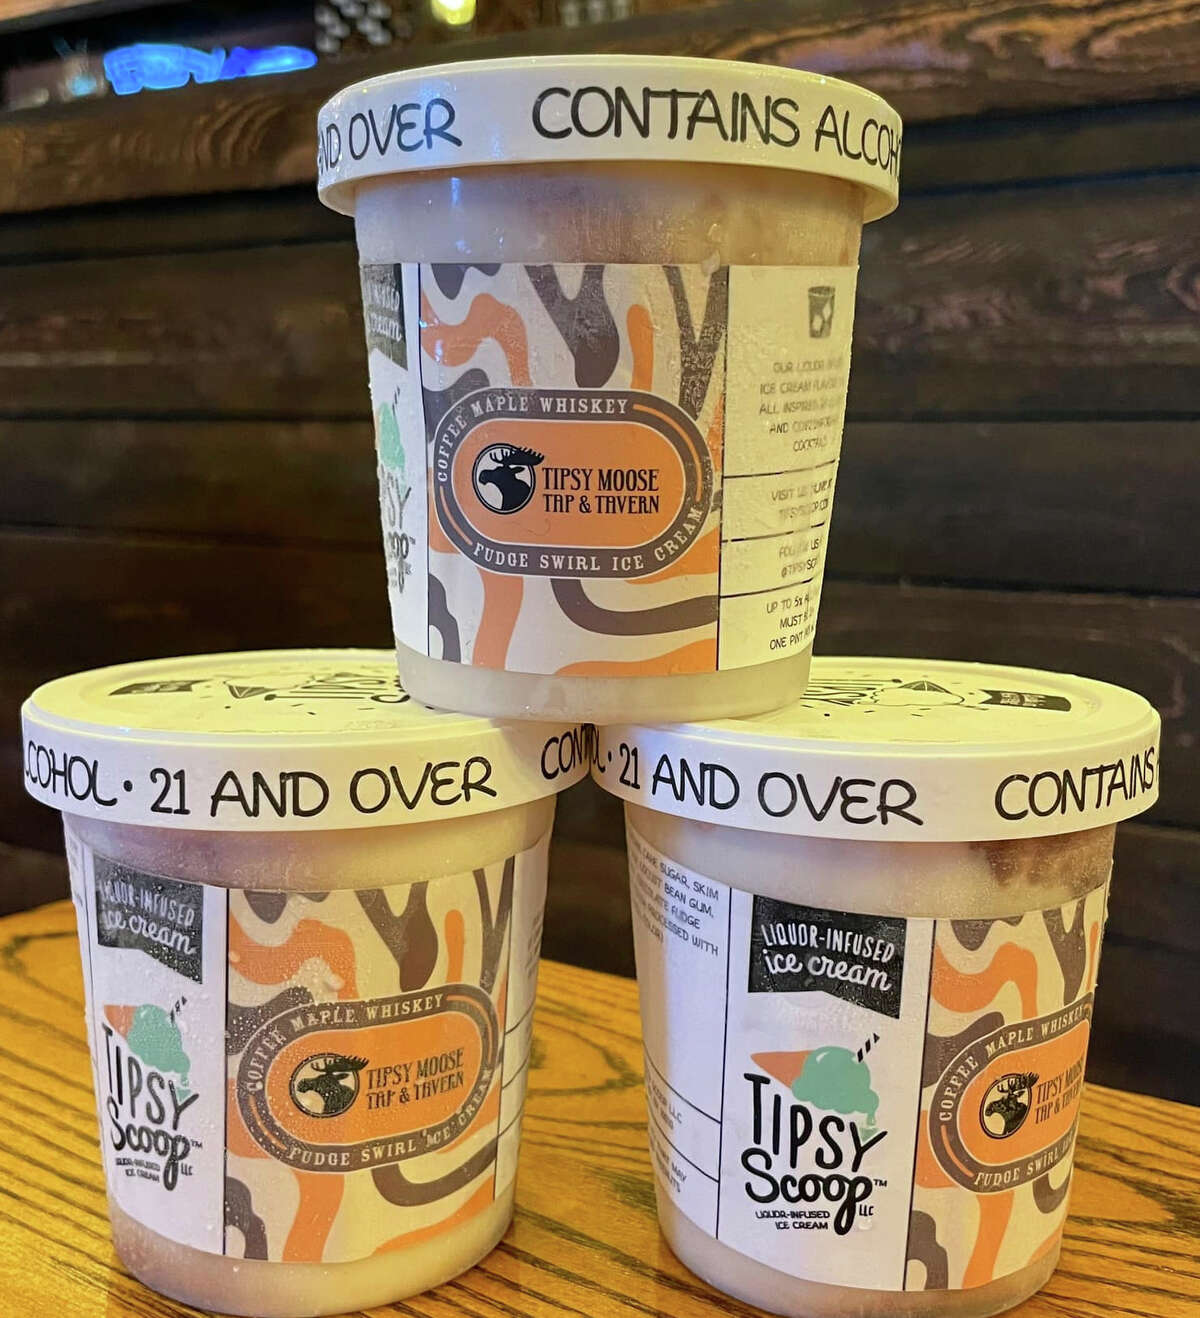 Tipsy Moose's Coffee-Maple Whiskey Fudge Swirl Ice Cream is available for in-house desserts or to-go pints.